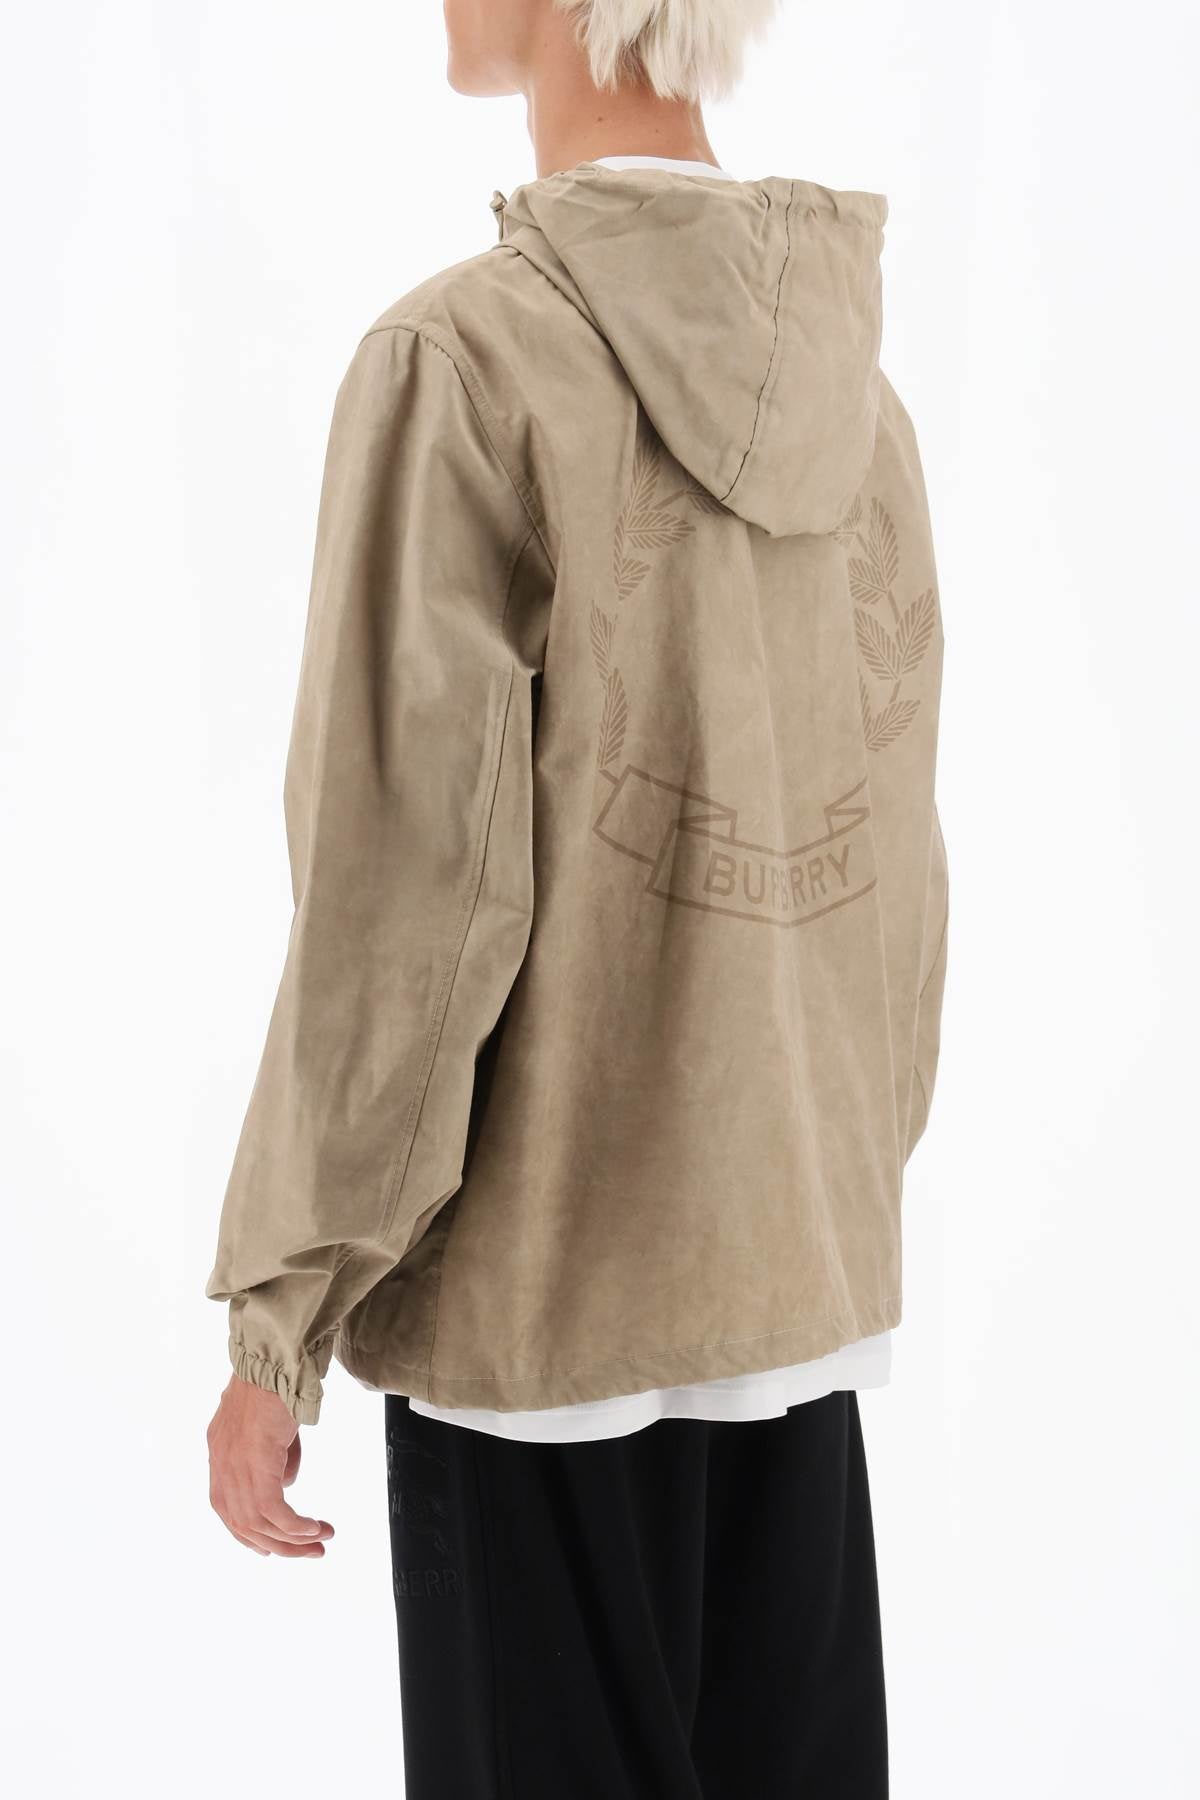 Shop Burberry Sporty Hooded Jacket With Ekd Motif And Adjustable Cuffs In Beige